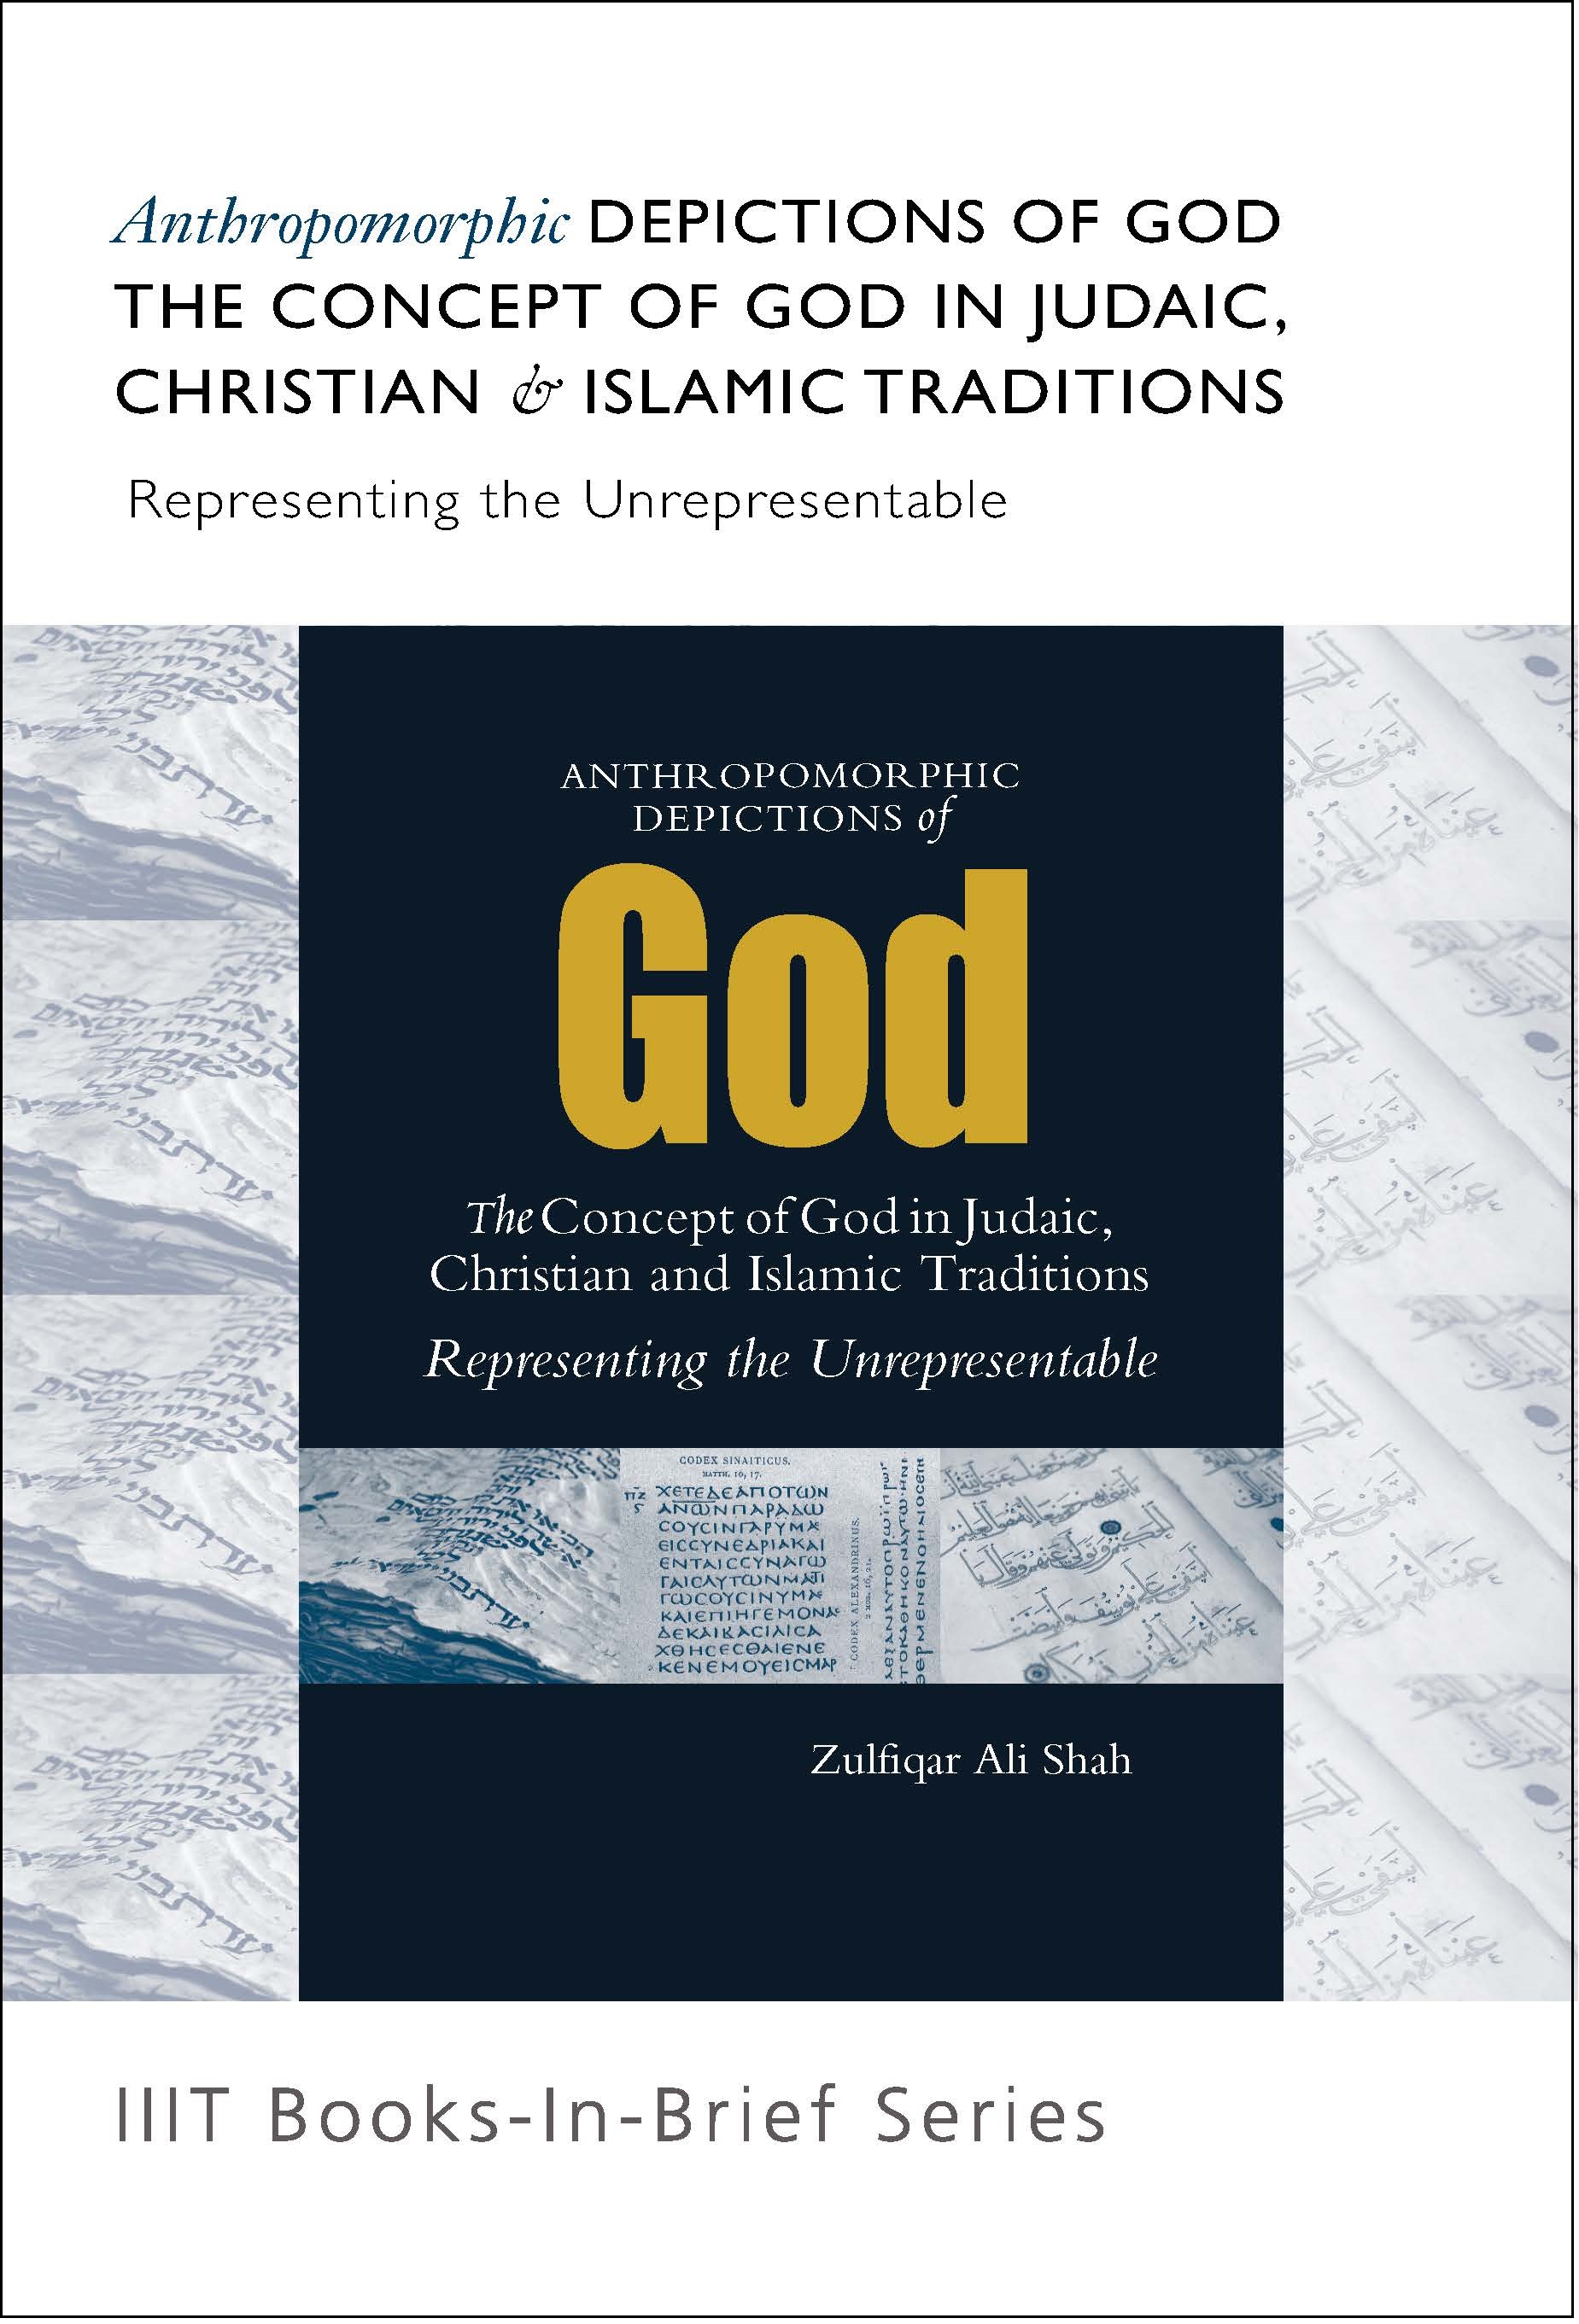 Books-in-Brief: Anthropomorphic Depictions of God: The Concept of God in Judaic, Christian, and Islamic Traditions: Representing the Unrepresentable